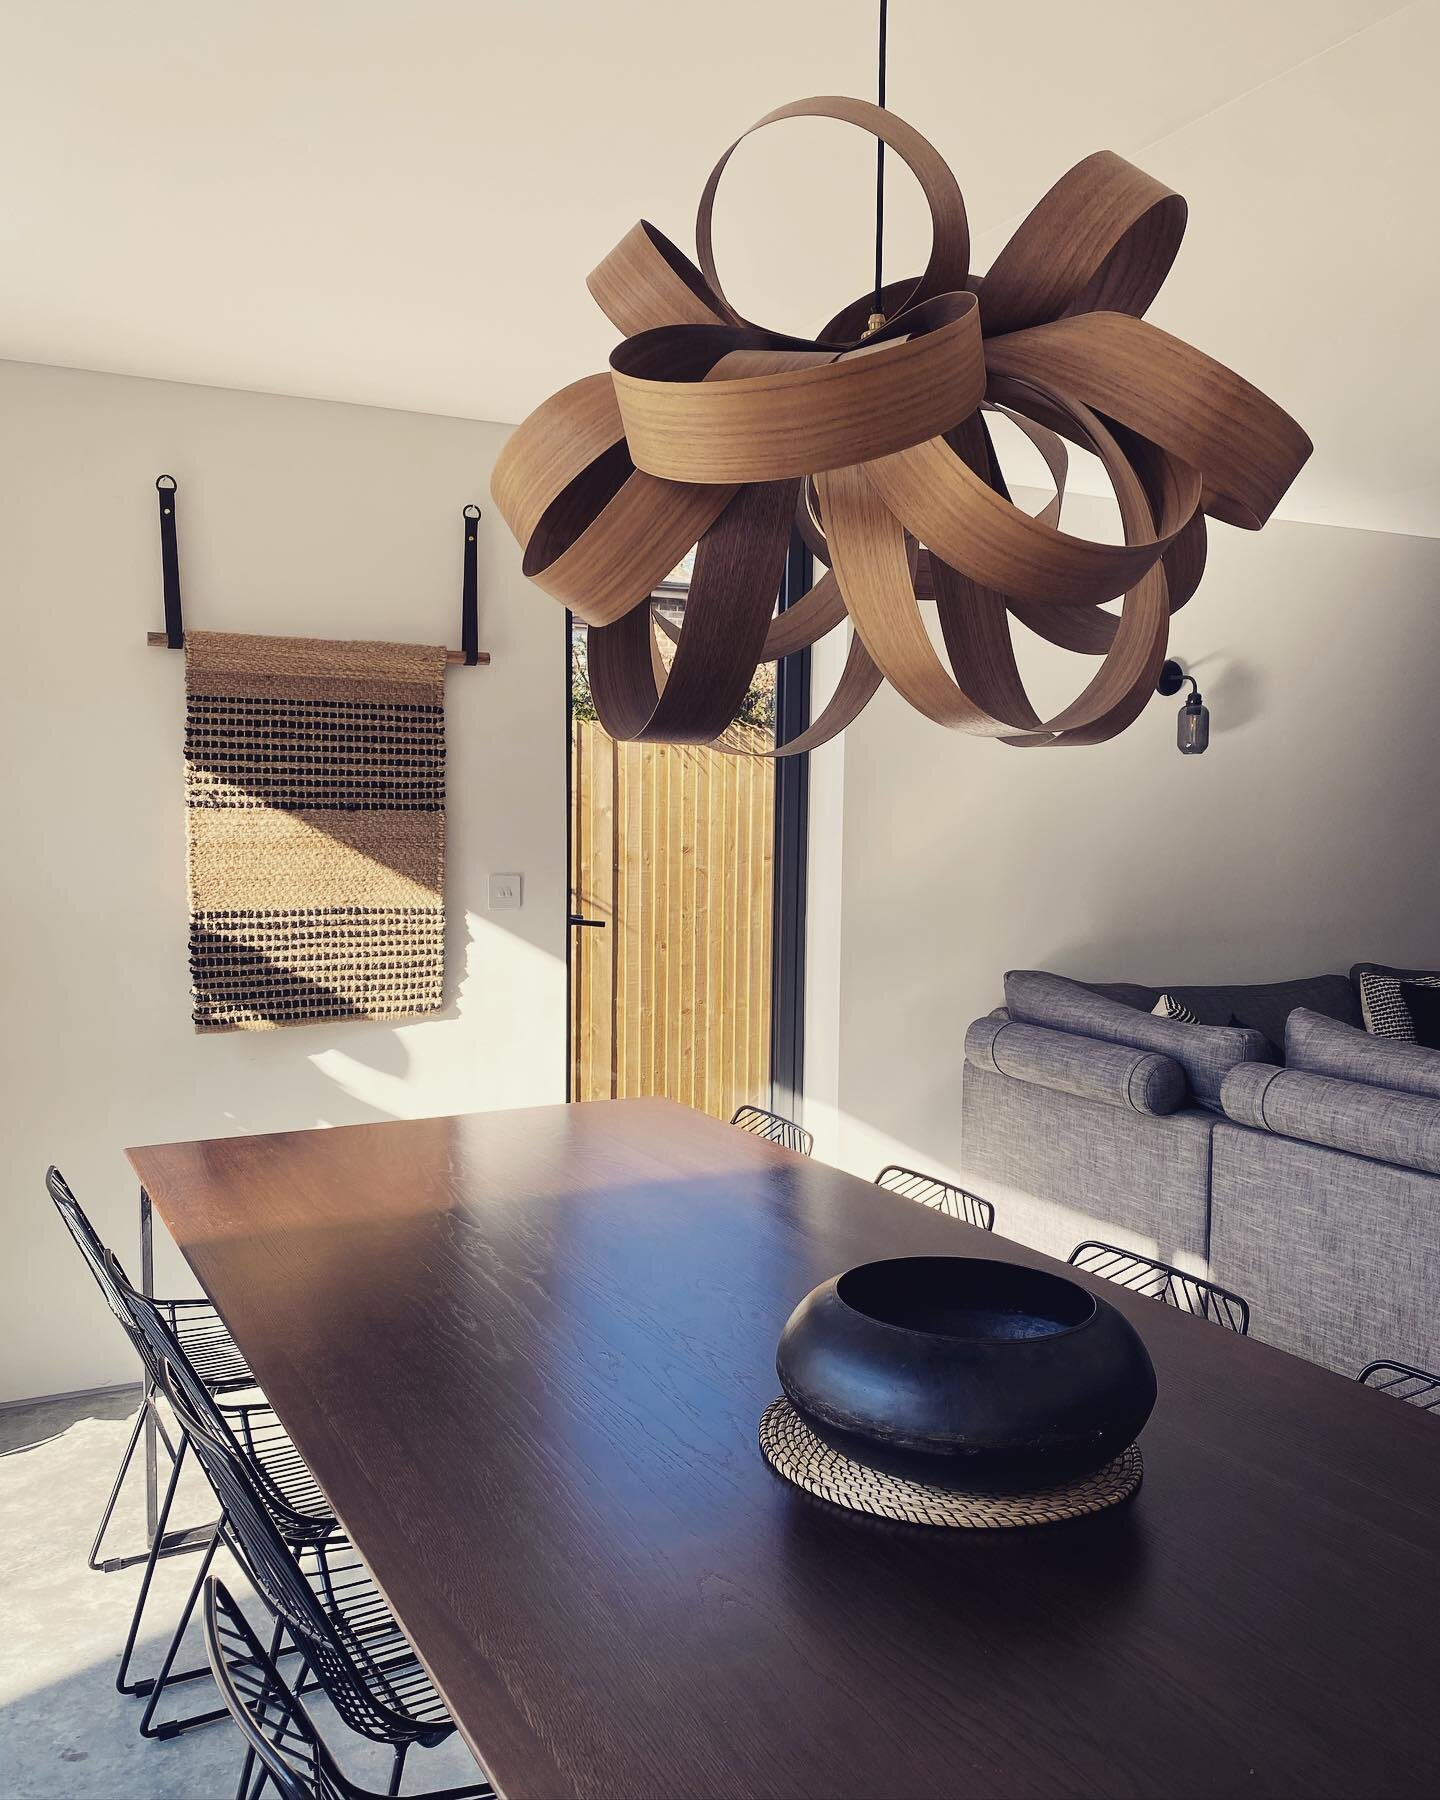 Loving our new tapestries from @nkukulife 

The house is looking guest ready for our competition winners @thesinclairs this weekend.

Light: @tomraffield 
Bowl: @nkukulife 
Tapestries: @nkukulife 

#diningroomdecor #diningroomdesign #openplanliving #